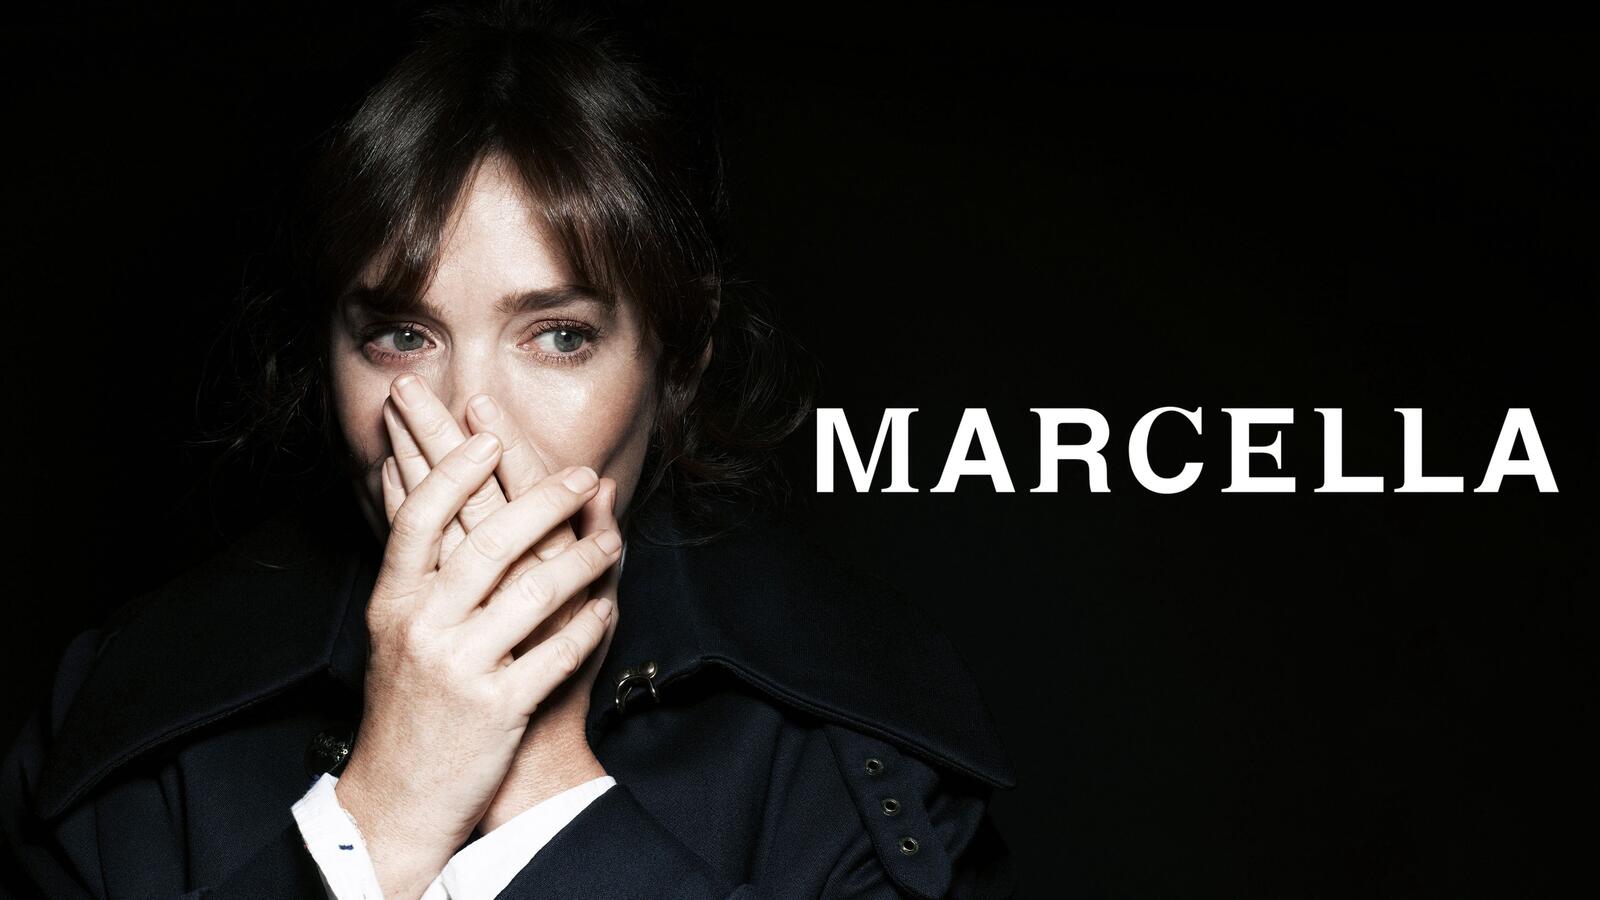 Wallpapers TV show poster Marcella on the desktop